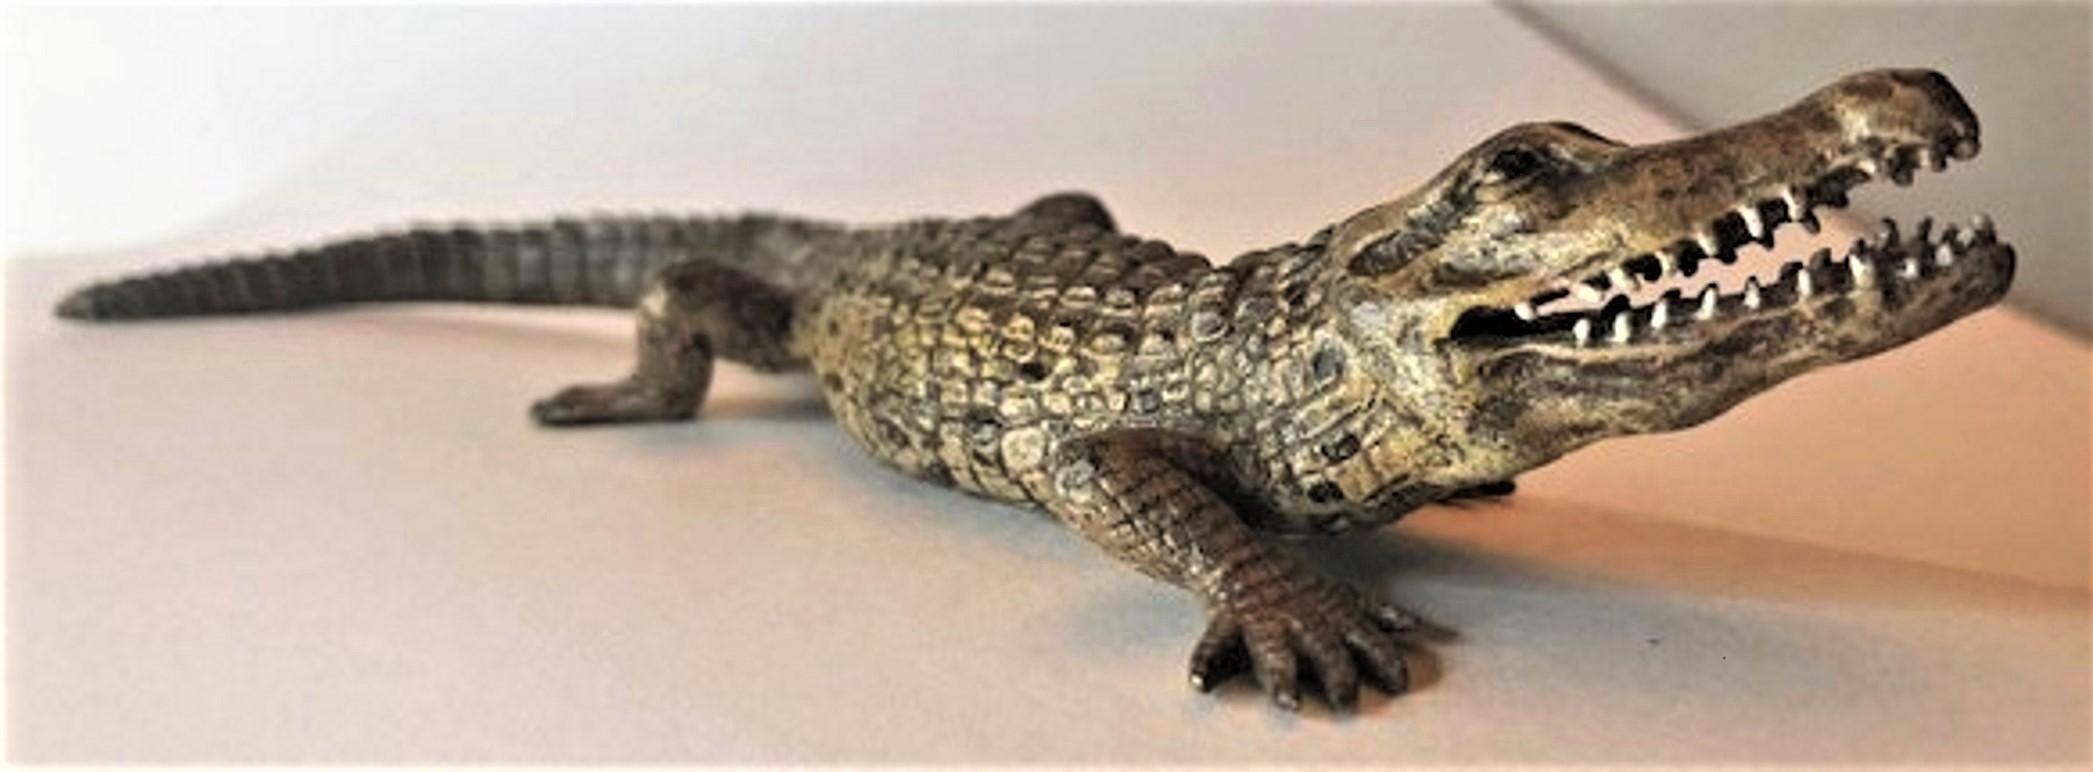 Artist: Franz Xaver Bergmann

Sculpture: Crocodile

This wonderful life-like little sculpture of a crocodile is actually a most convenient paperweight, and a perfect desk accessory. Created in polychrome cold-painted bronze, and rendered in the